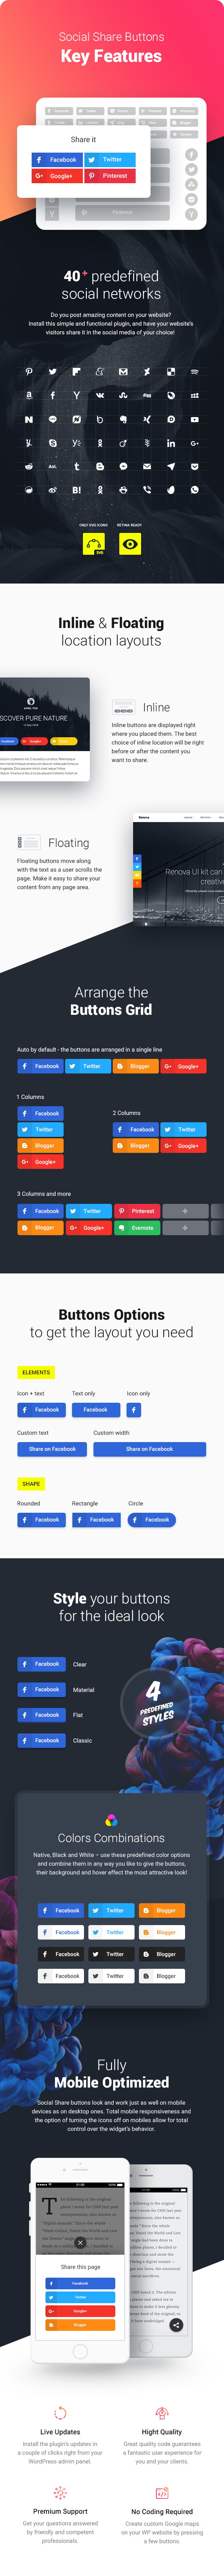 Social Share Buttons for WordPress - 2